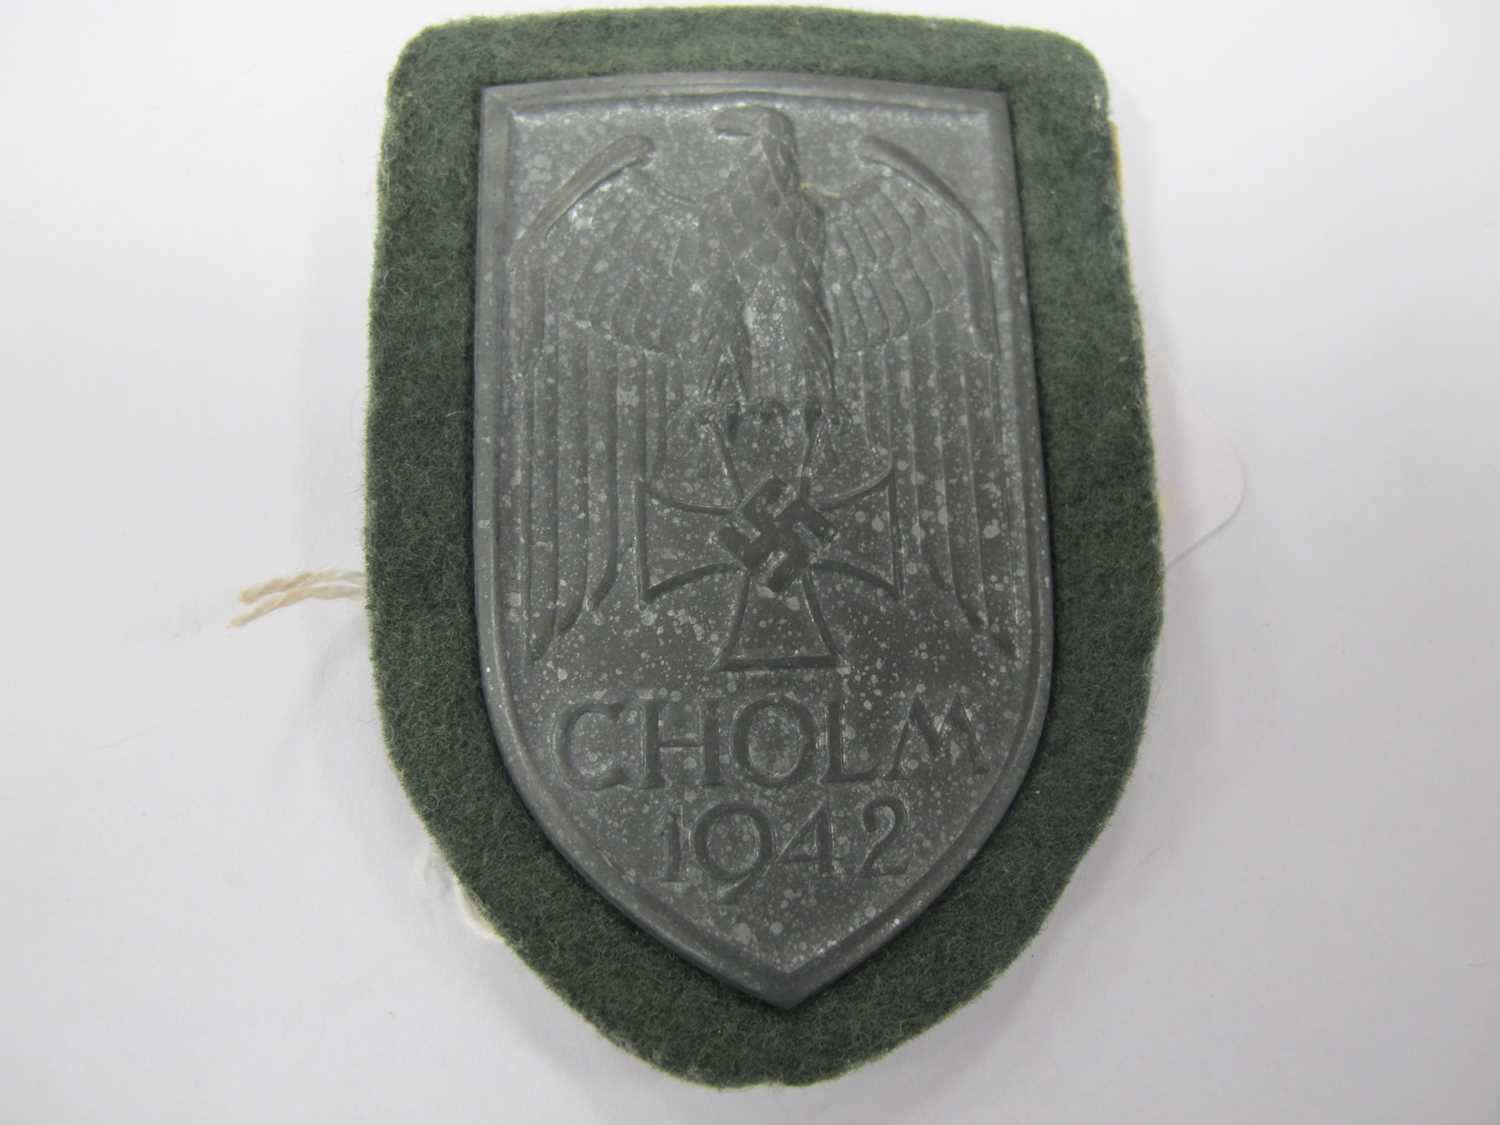 WWI Third Reich German Army Cholm/Kholm 1942 Campaign Shield, with field grey cloth backing. Due - Image 2 of 6